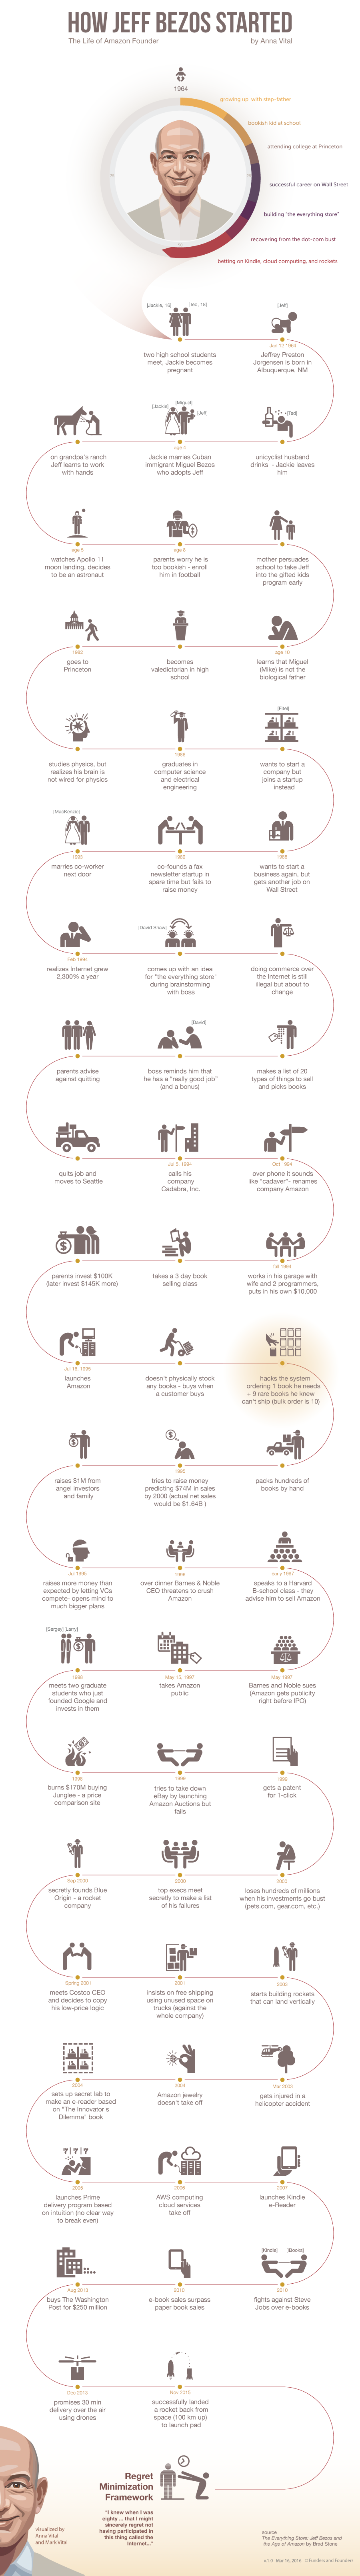 how-jeff-bezos-started-infographic